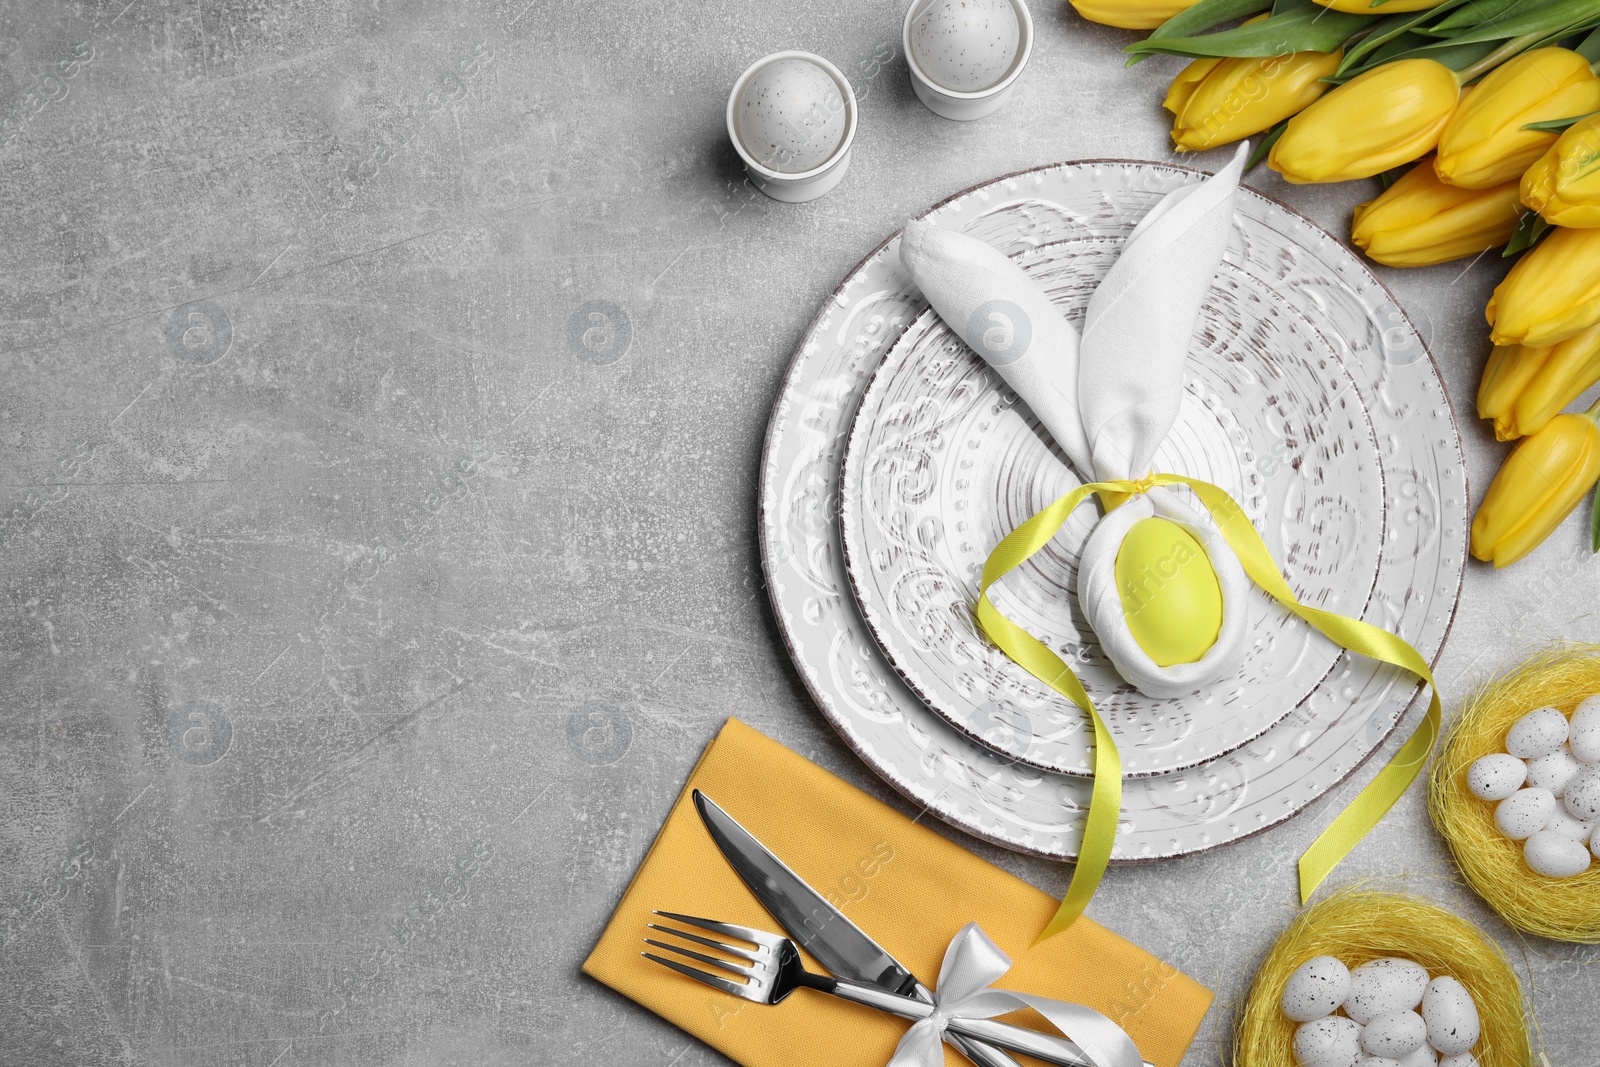 Photo of Festive table setting with bunny made of painted egg and napkin on light grey background, flat lay with space for text. Easter celebration